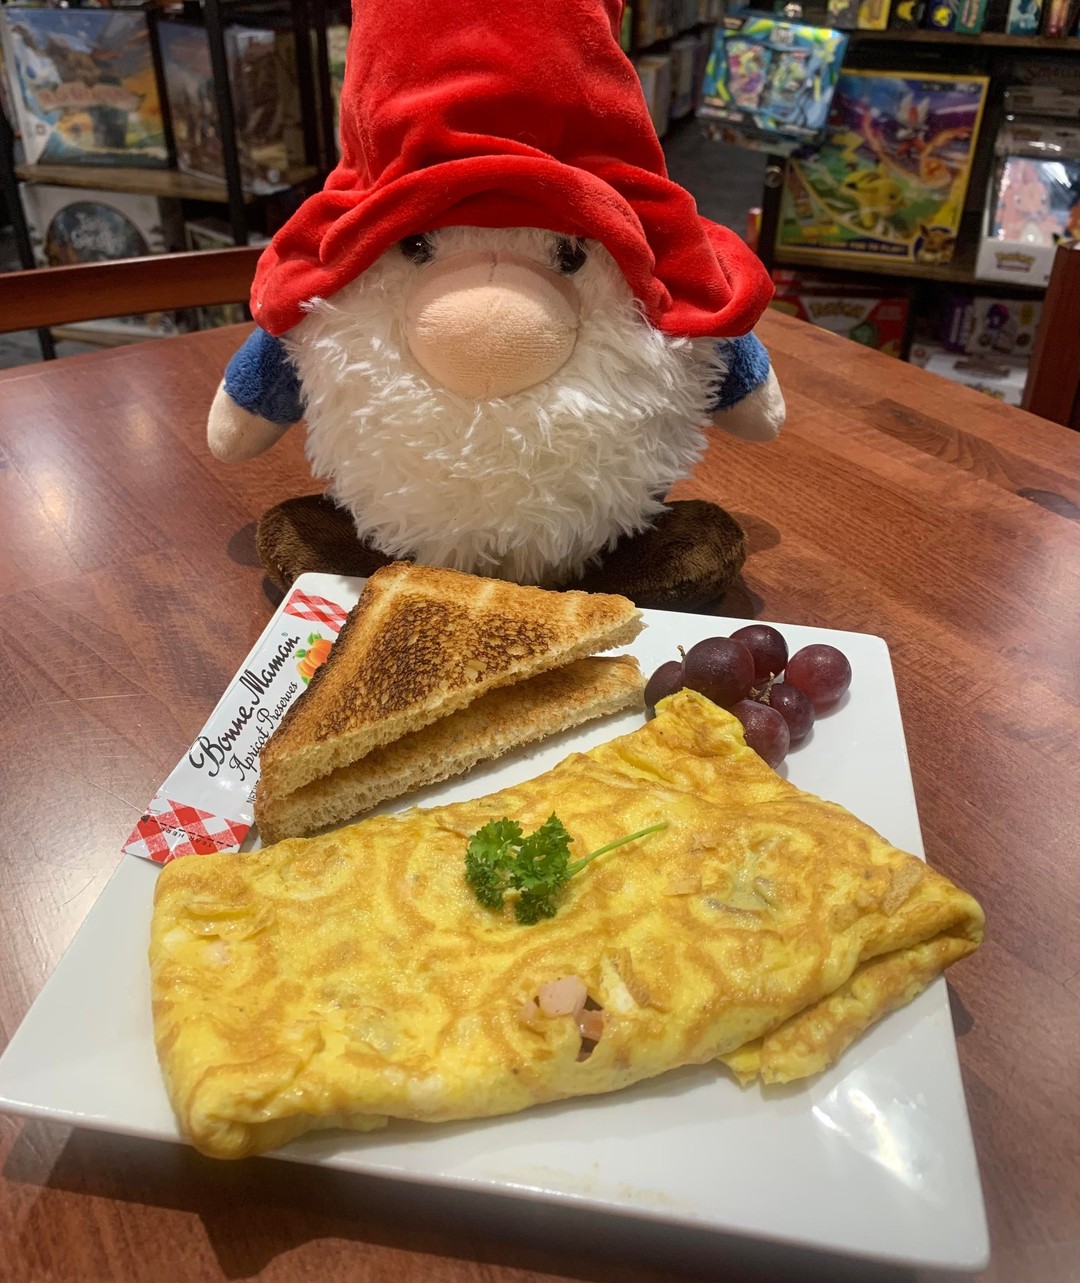 It's time for a filling breakfast! Treat yourself and try our Gnosh Omelet that has turkey, provolone, tomato, red onion, roasted pepper, and bacon! Fuel your body for the day with breakfast served every day until 11!

#TheGnoshery #GnomeGames